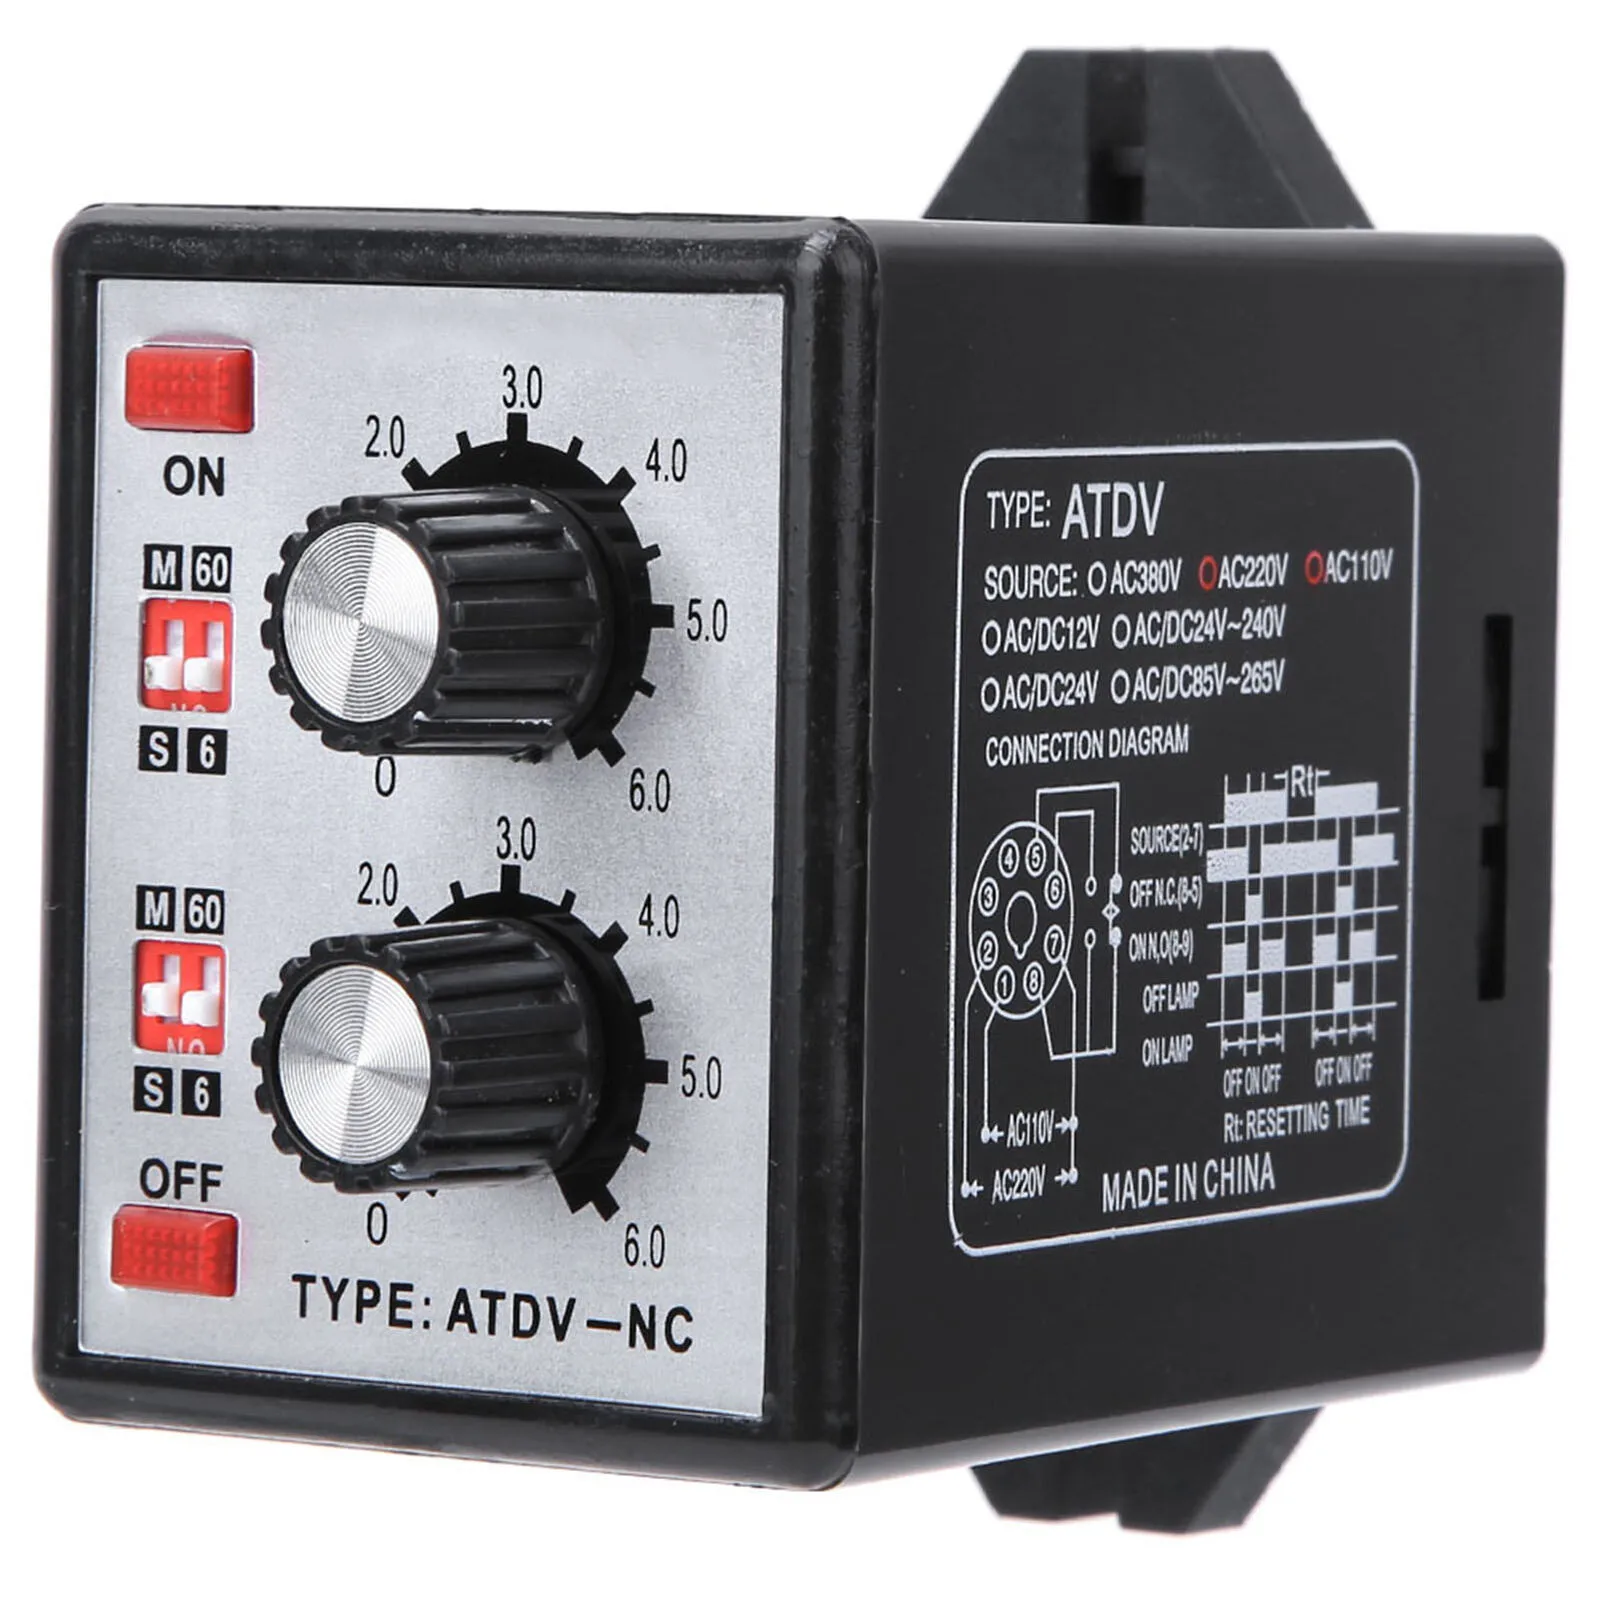 

On Off Twin Timer Relay Knob Control Time Switch ATDV-YC 6S-60M Relay Board AC 110/220V DC 12V DC 14V Electrical Access New